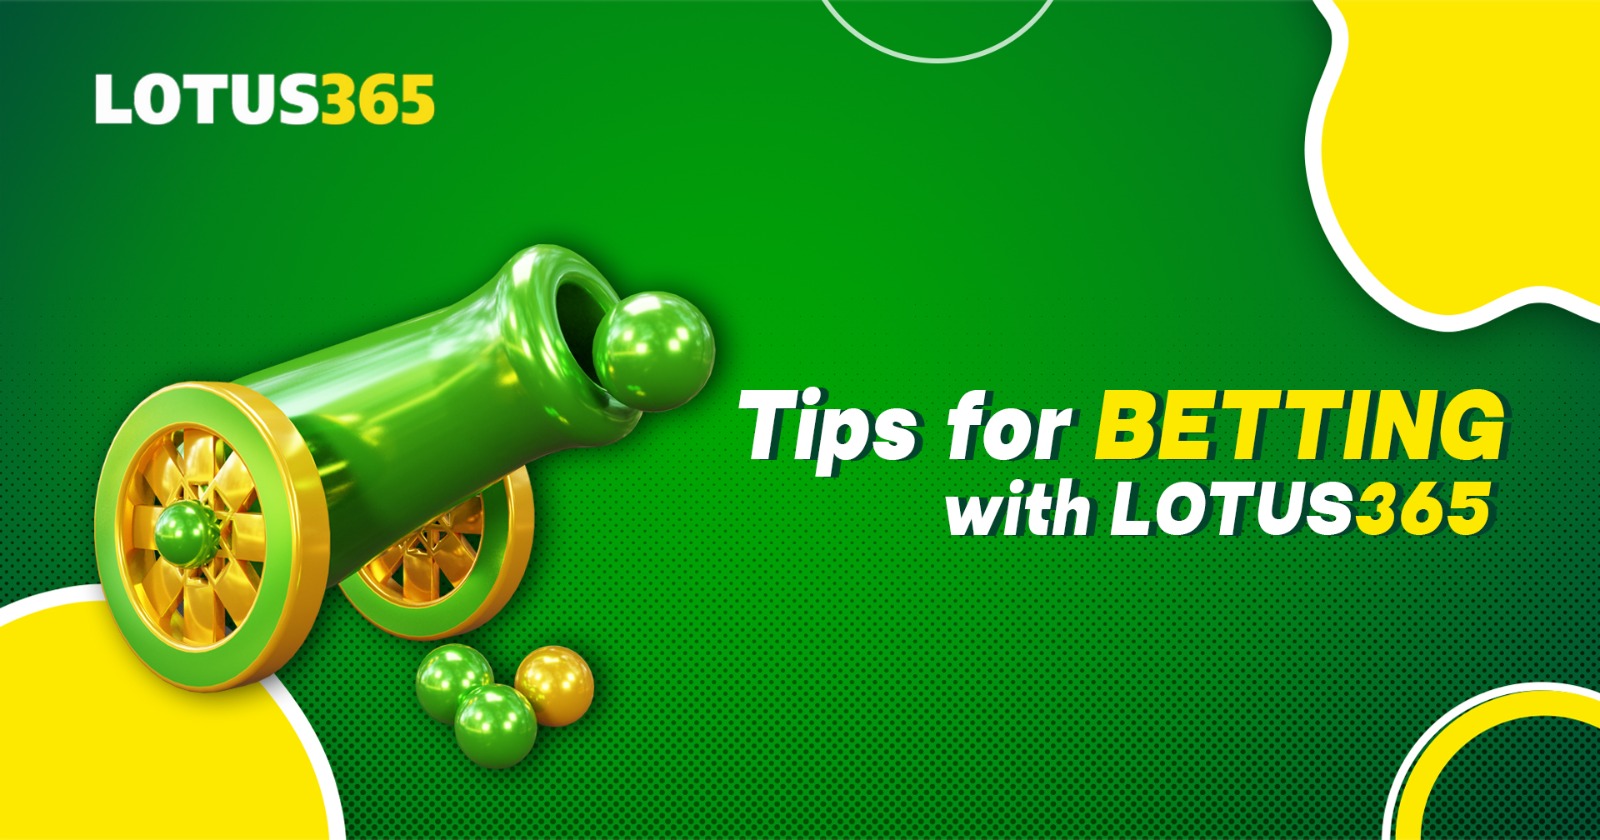 Tips for Betting with Lotus365